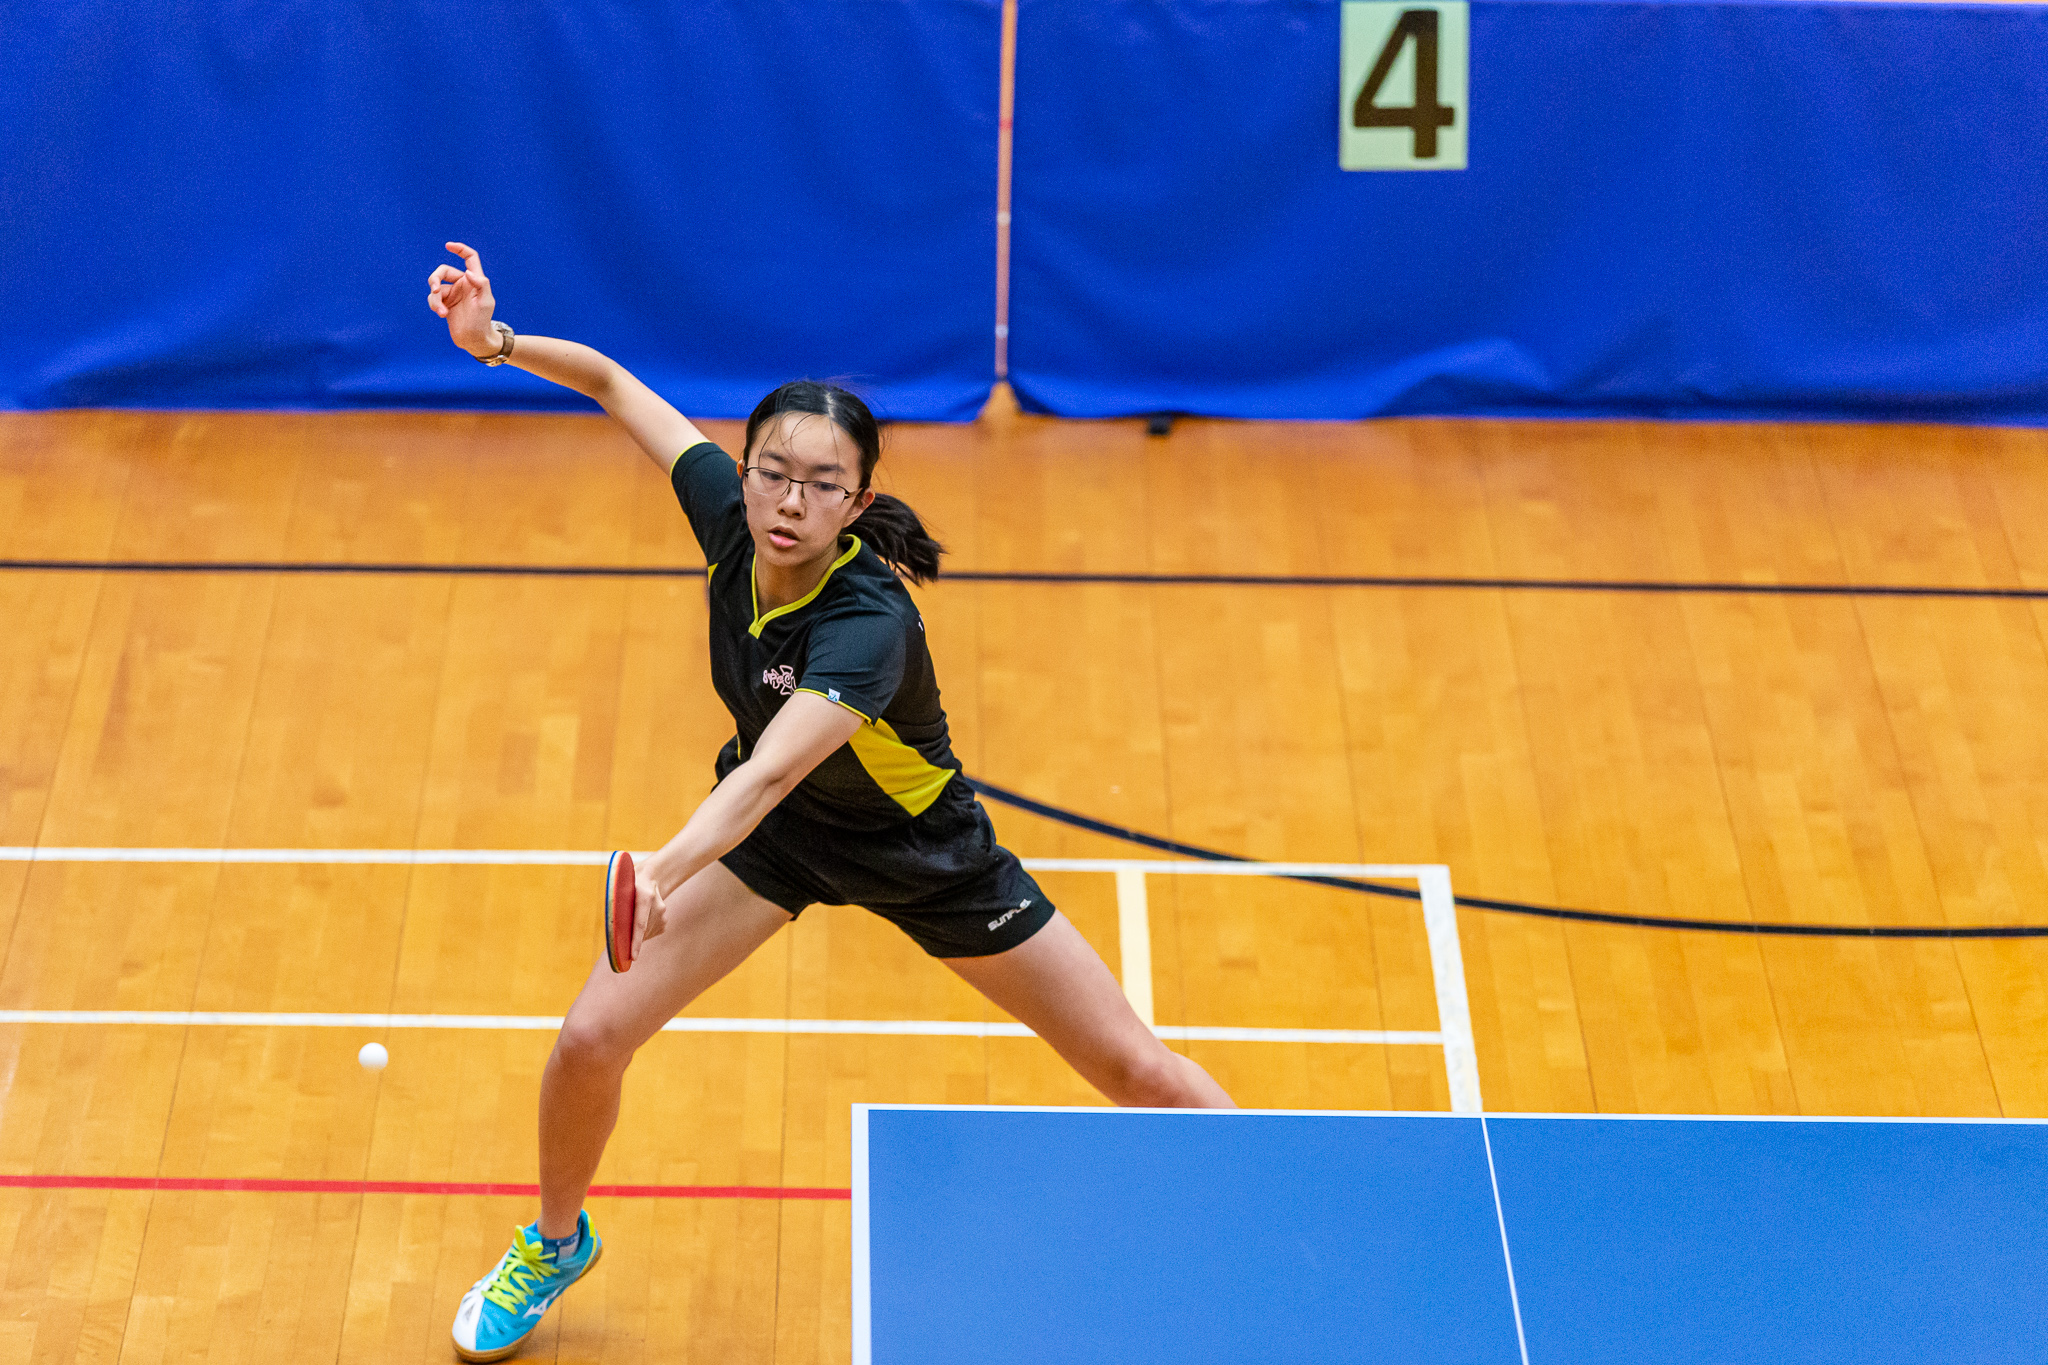 Pedrey Ng Wing-lam of St. Paul's Co-educational College took first place in the girls' singles event.